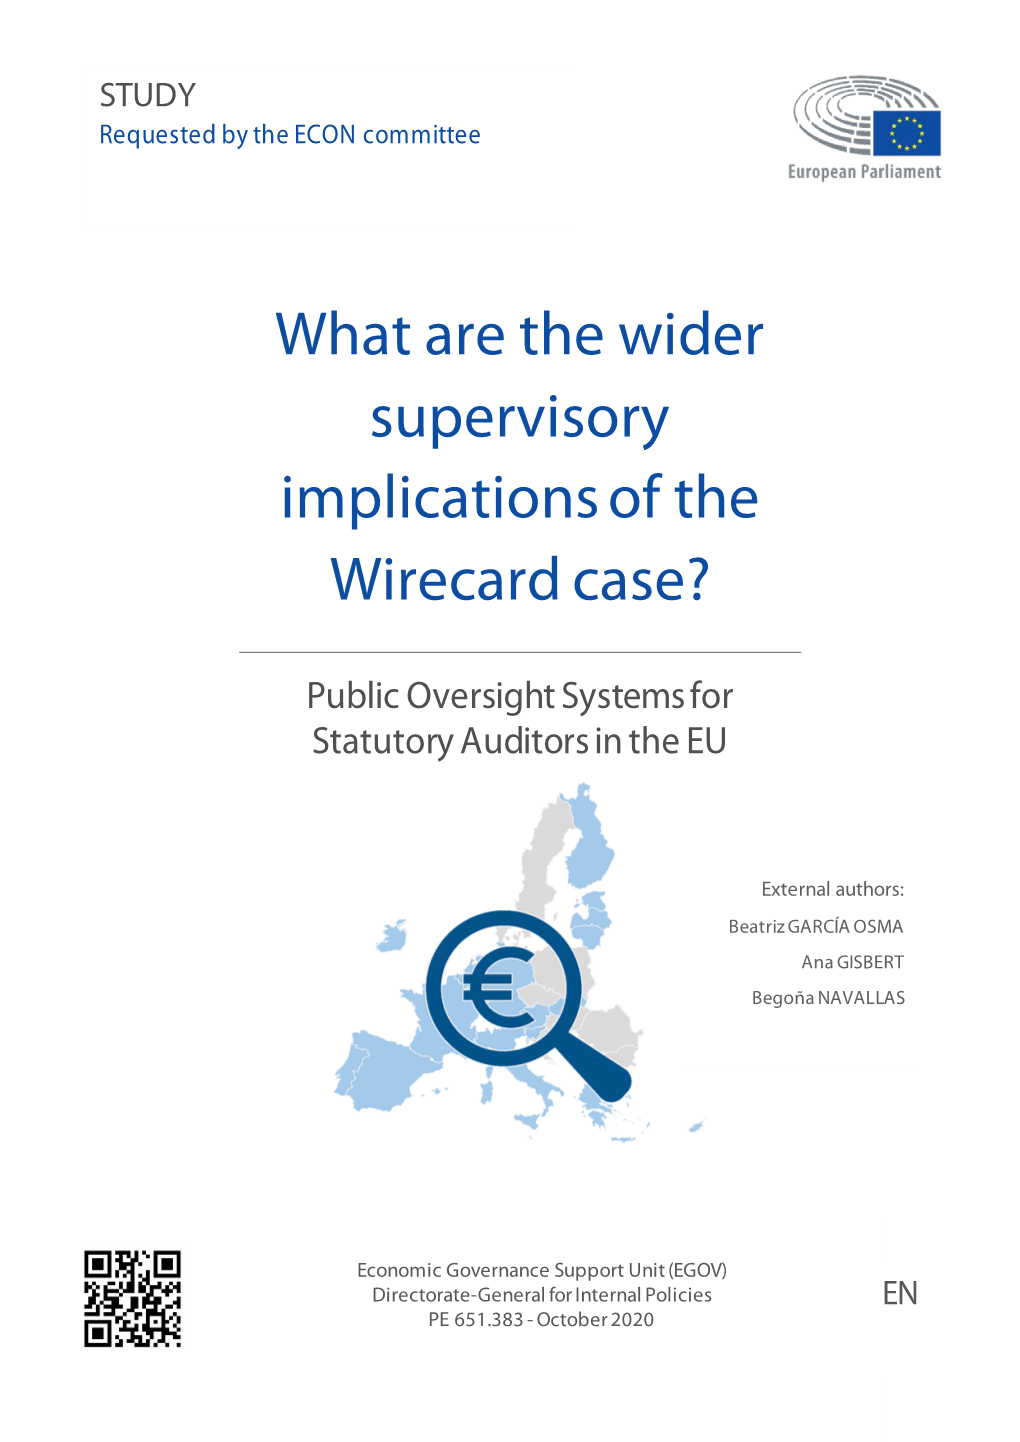 What Are the Wider Supervisory Implications of the Wirecard Case?